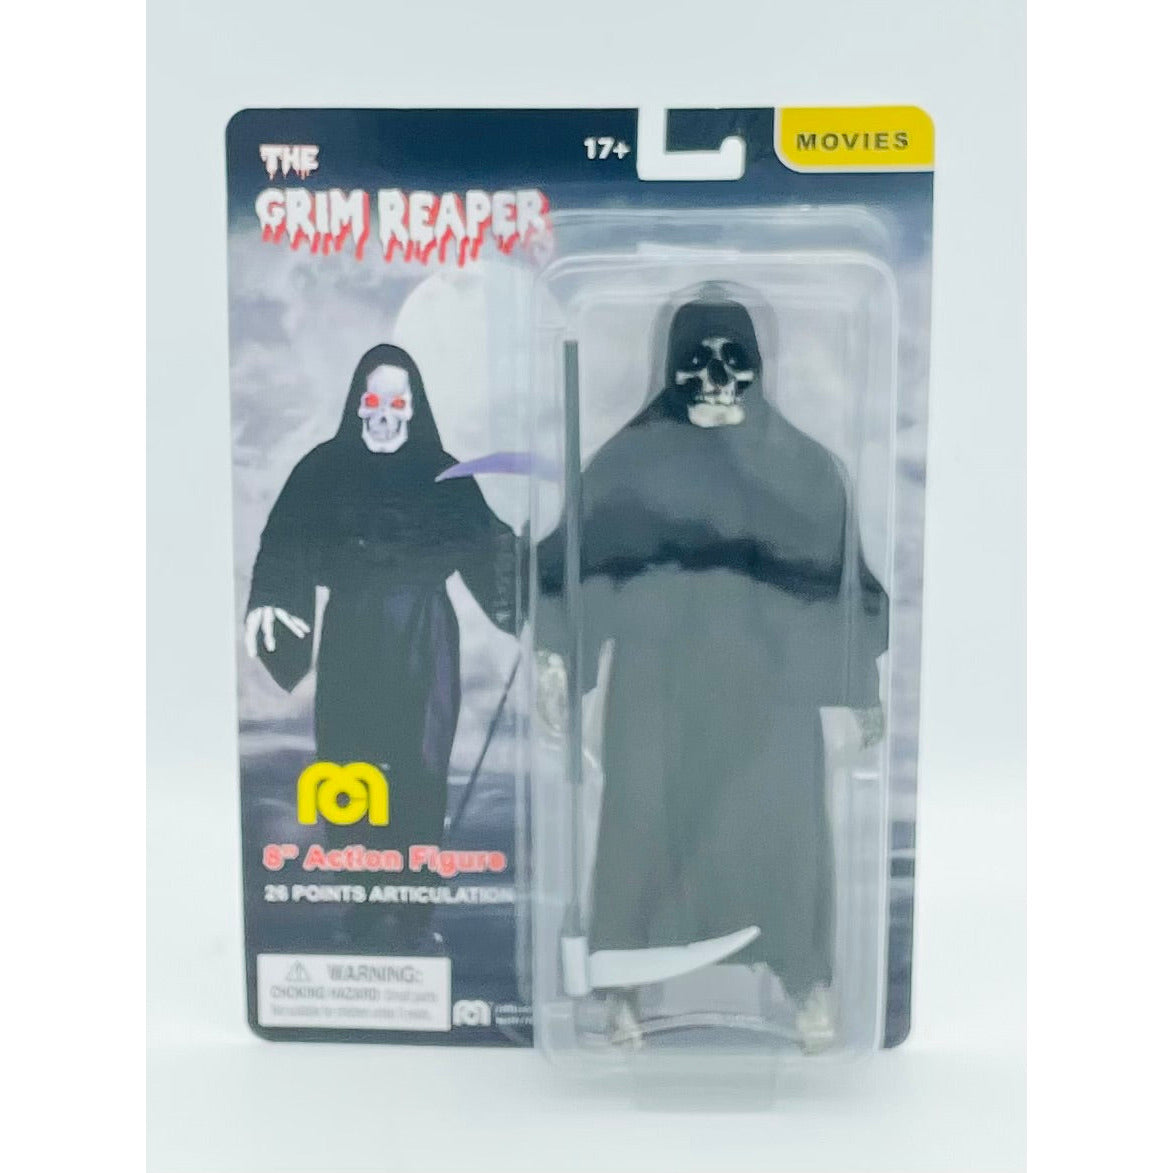 2021 Topps x Mego The Grim Reaper Limited Edition Action Figure